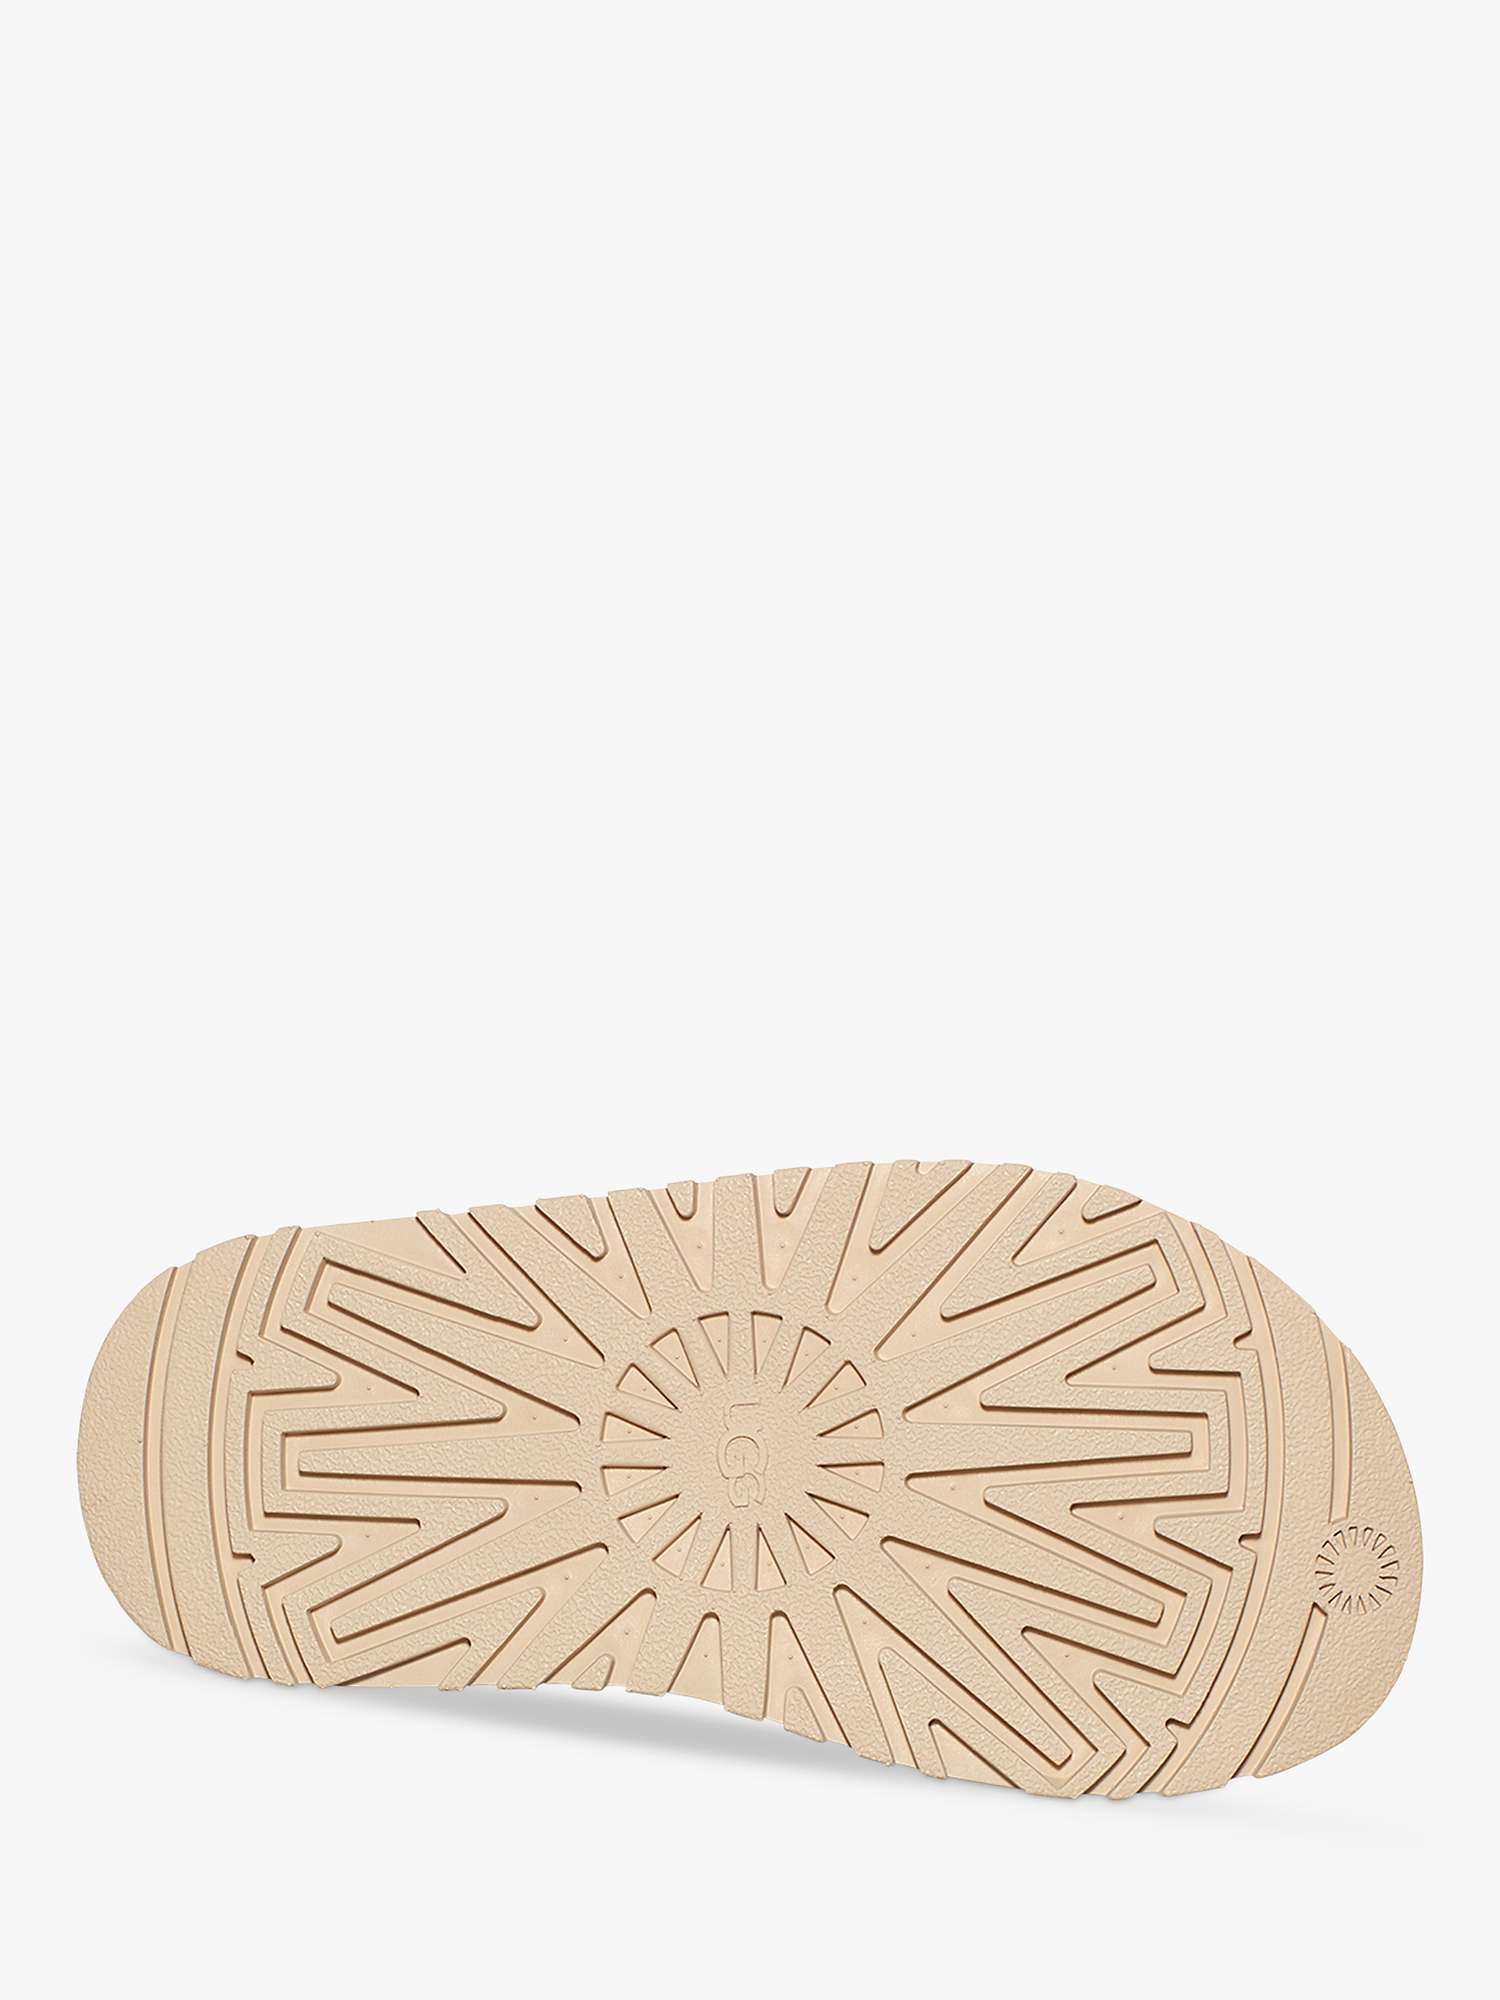 Buy UGG Kids' Goldenglow Chunky Sandals, Neutral Online at johnlewis.com